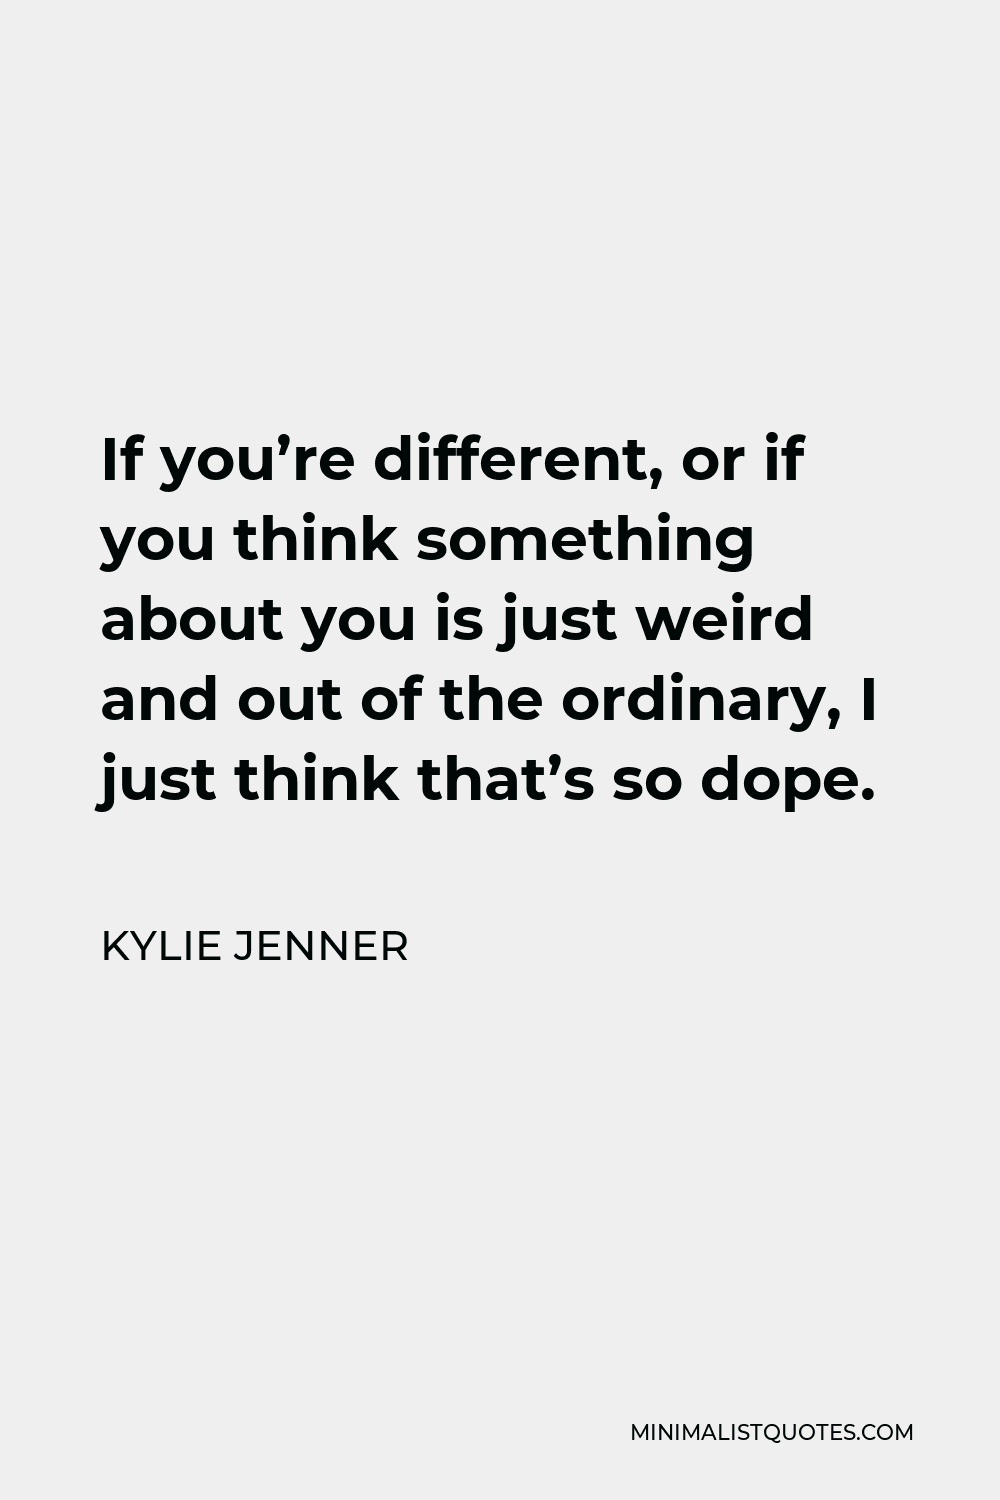 Kylie Jenner Quote - If you’re different, or if you think something about you is just weird and out of the ordinary, I just think that’s so dope.